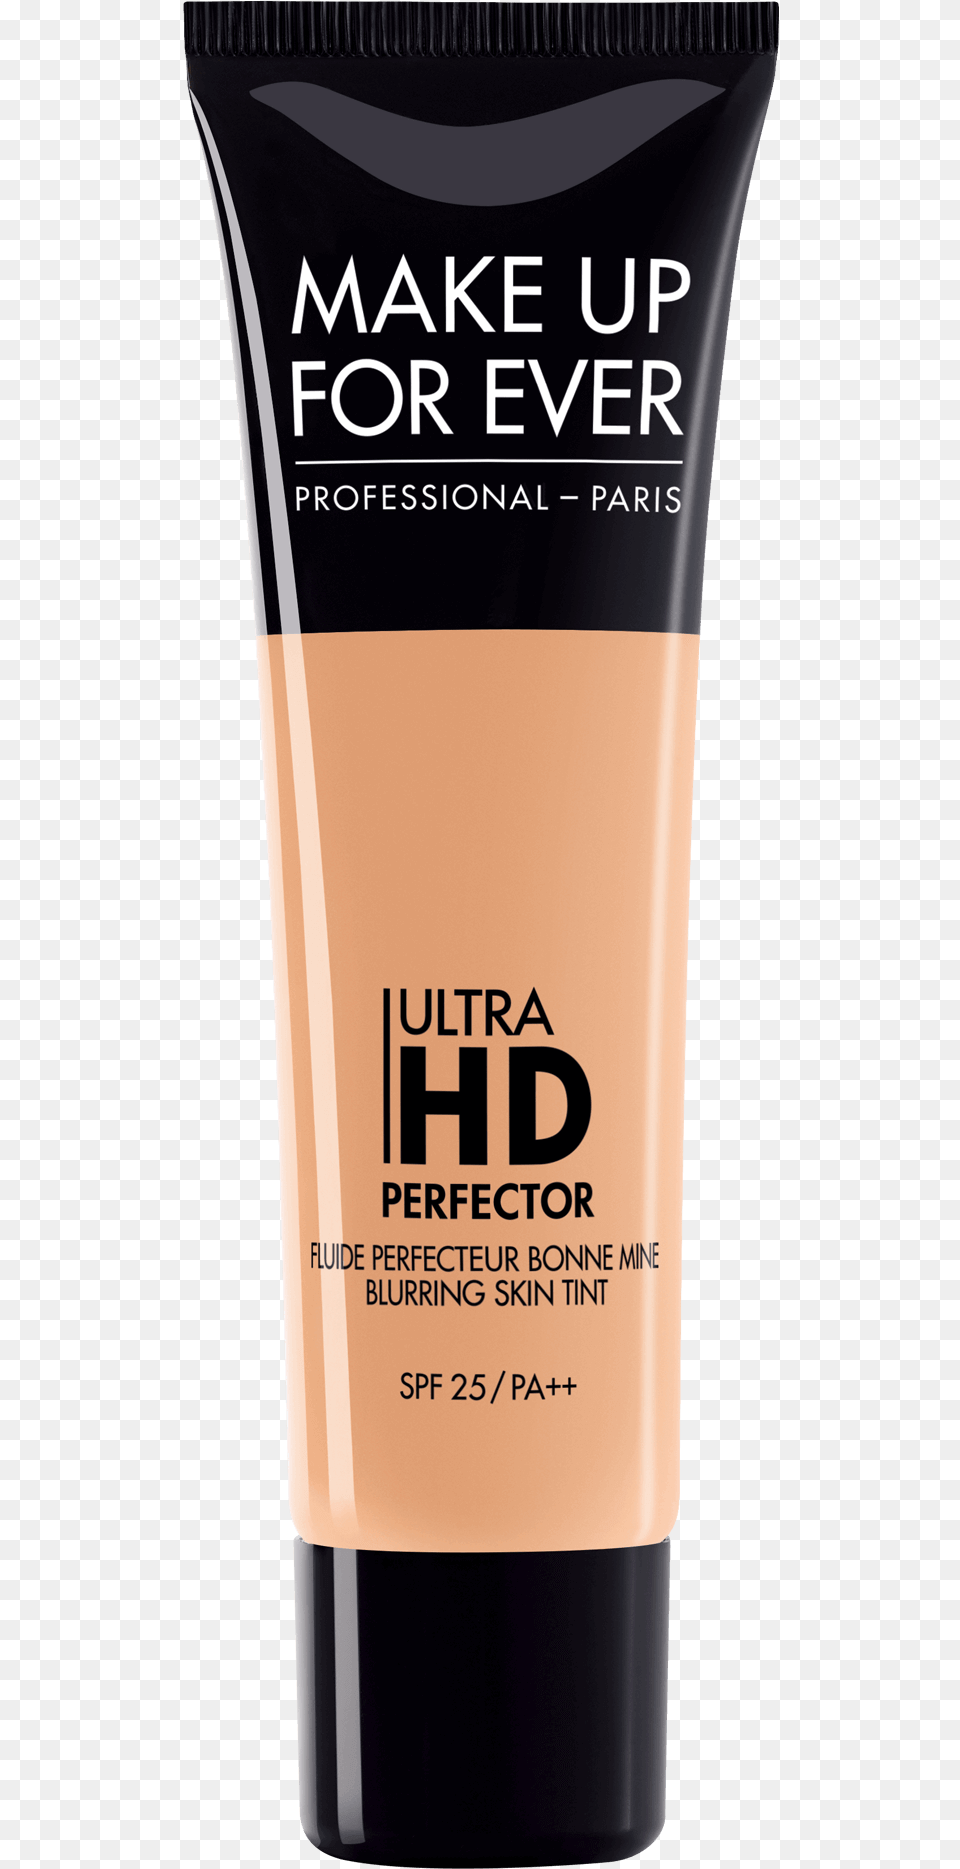 Make Up For Ever Ultra Hd Perfector, Bottle, Cosmetics, Aftershave, Sunscreen Png